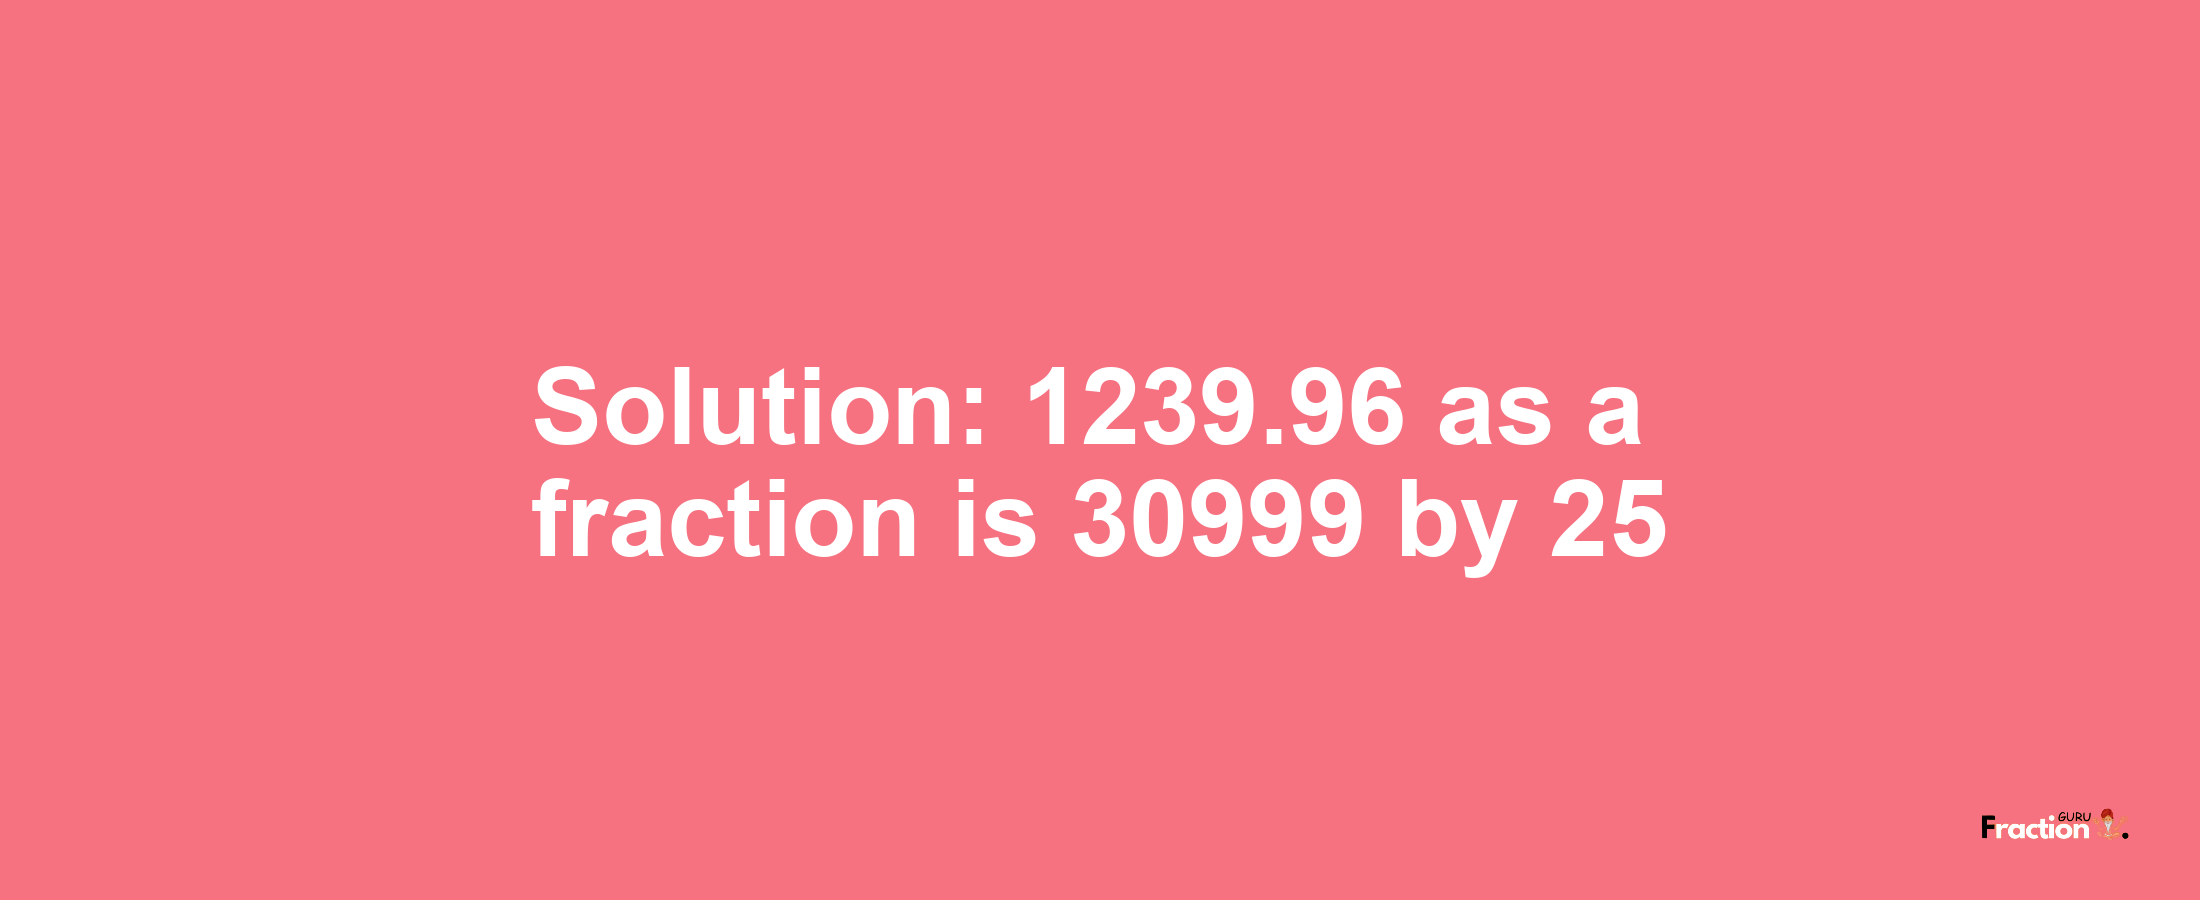 Solution:1239.96 as a fraction is 30999/25